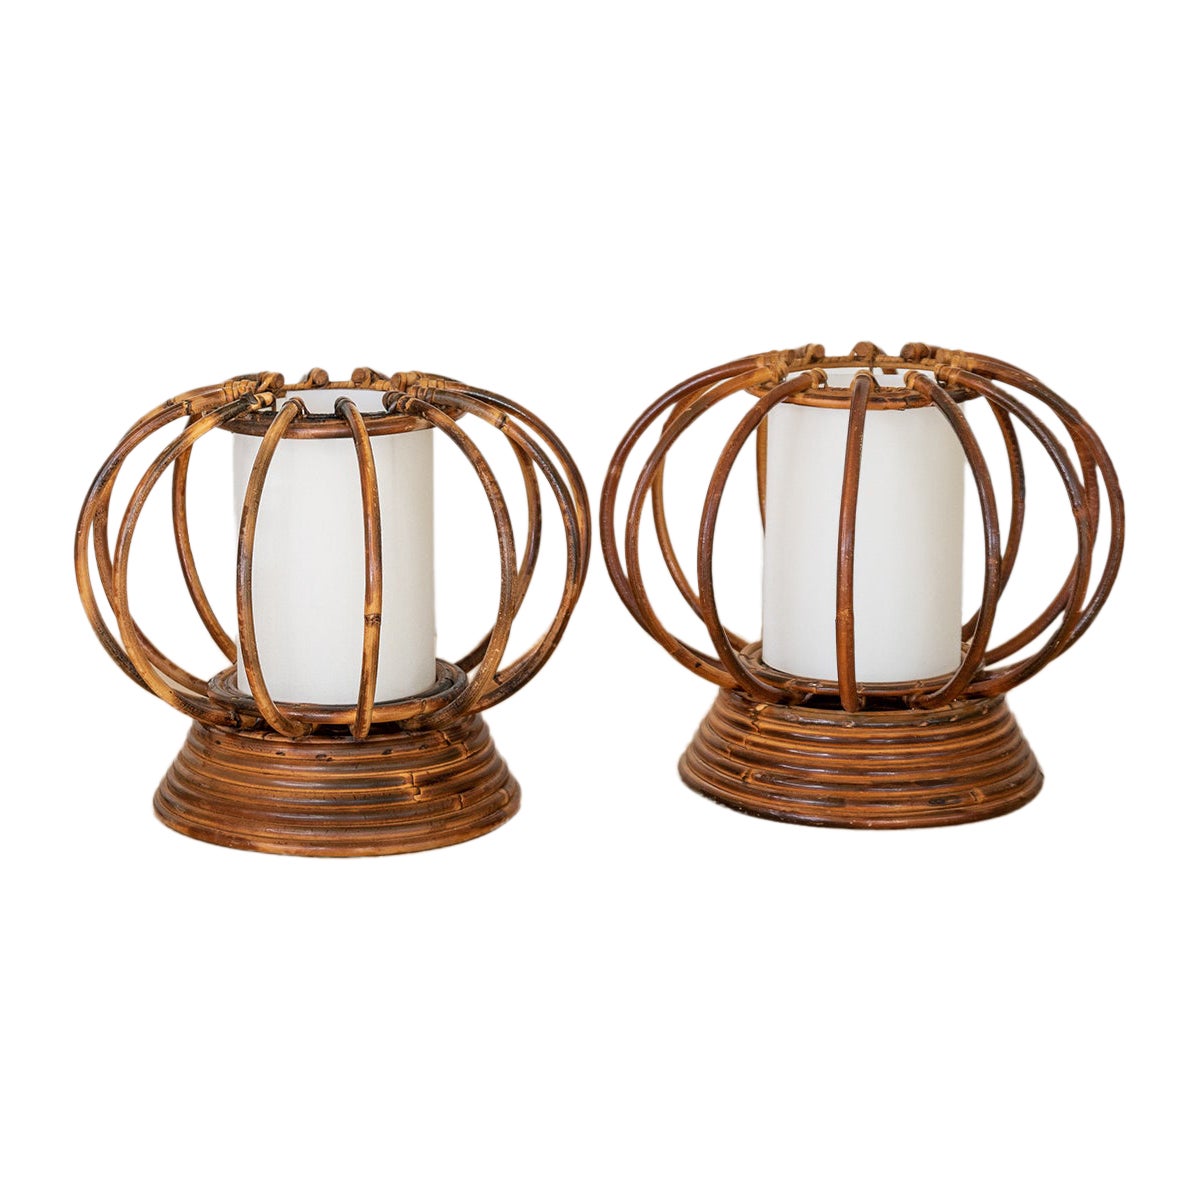 Pair of French Rattan Orb Table Lamps